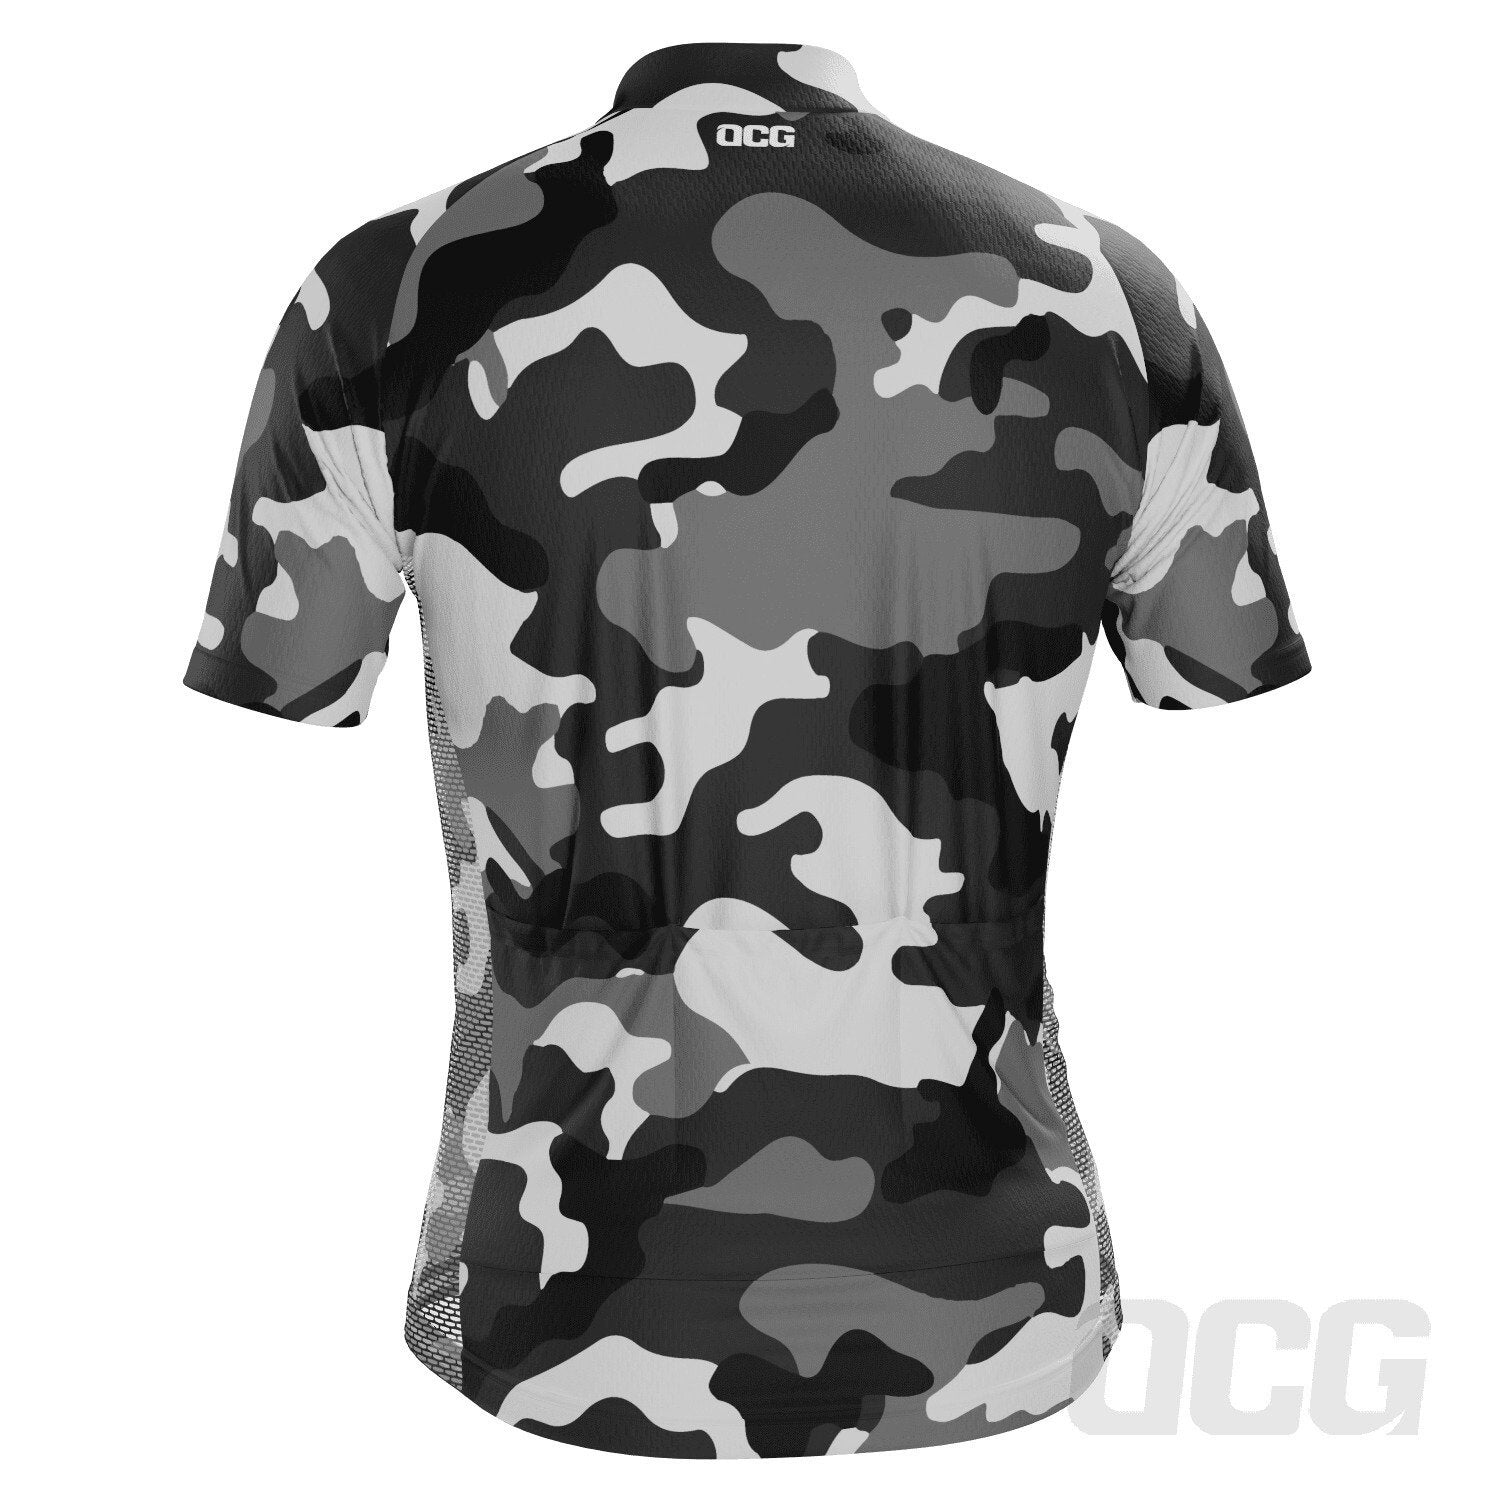 Men's Camouflage Short Sleeve Cycling Jersey